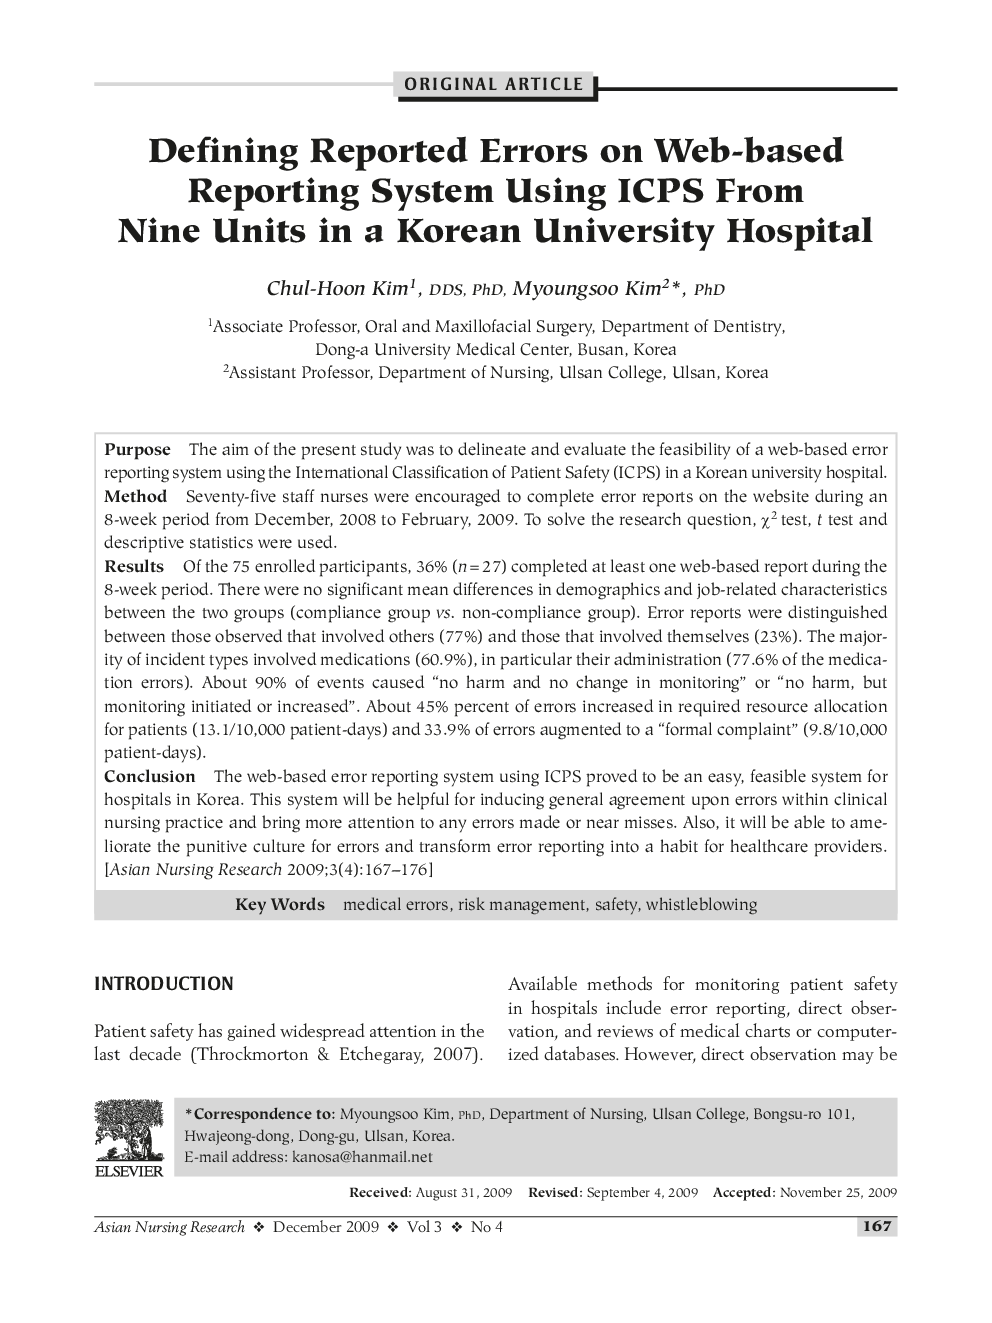 Defining Reported Errors on Web-based Reporting System Using ICPS From Nine Units in a Korean University Hospital